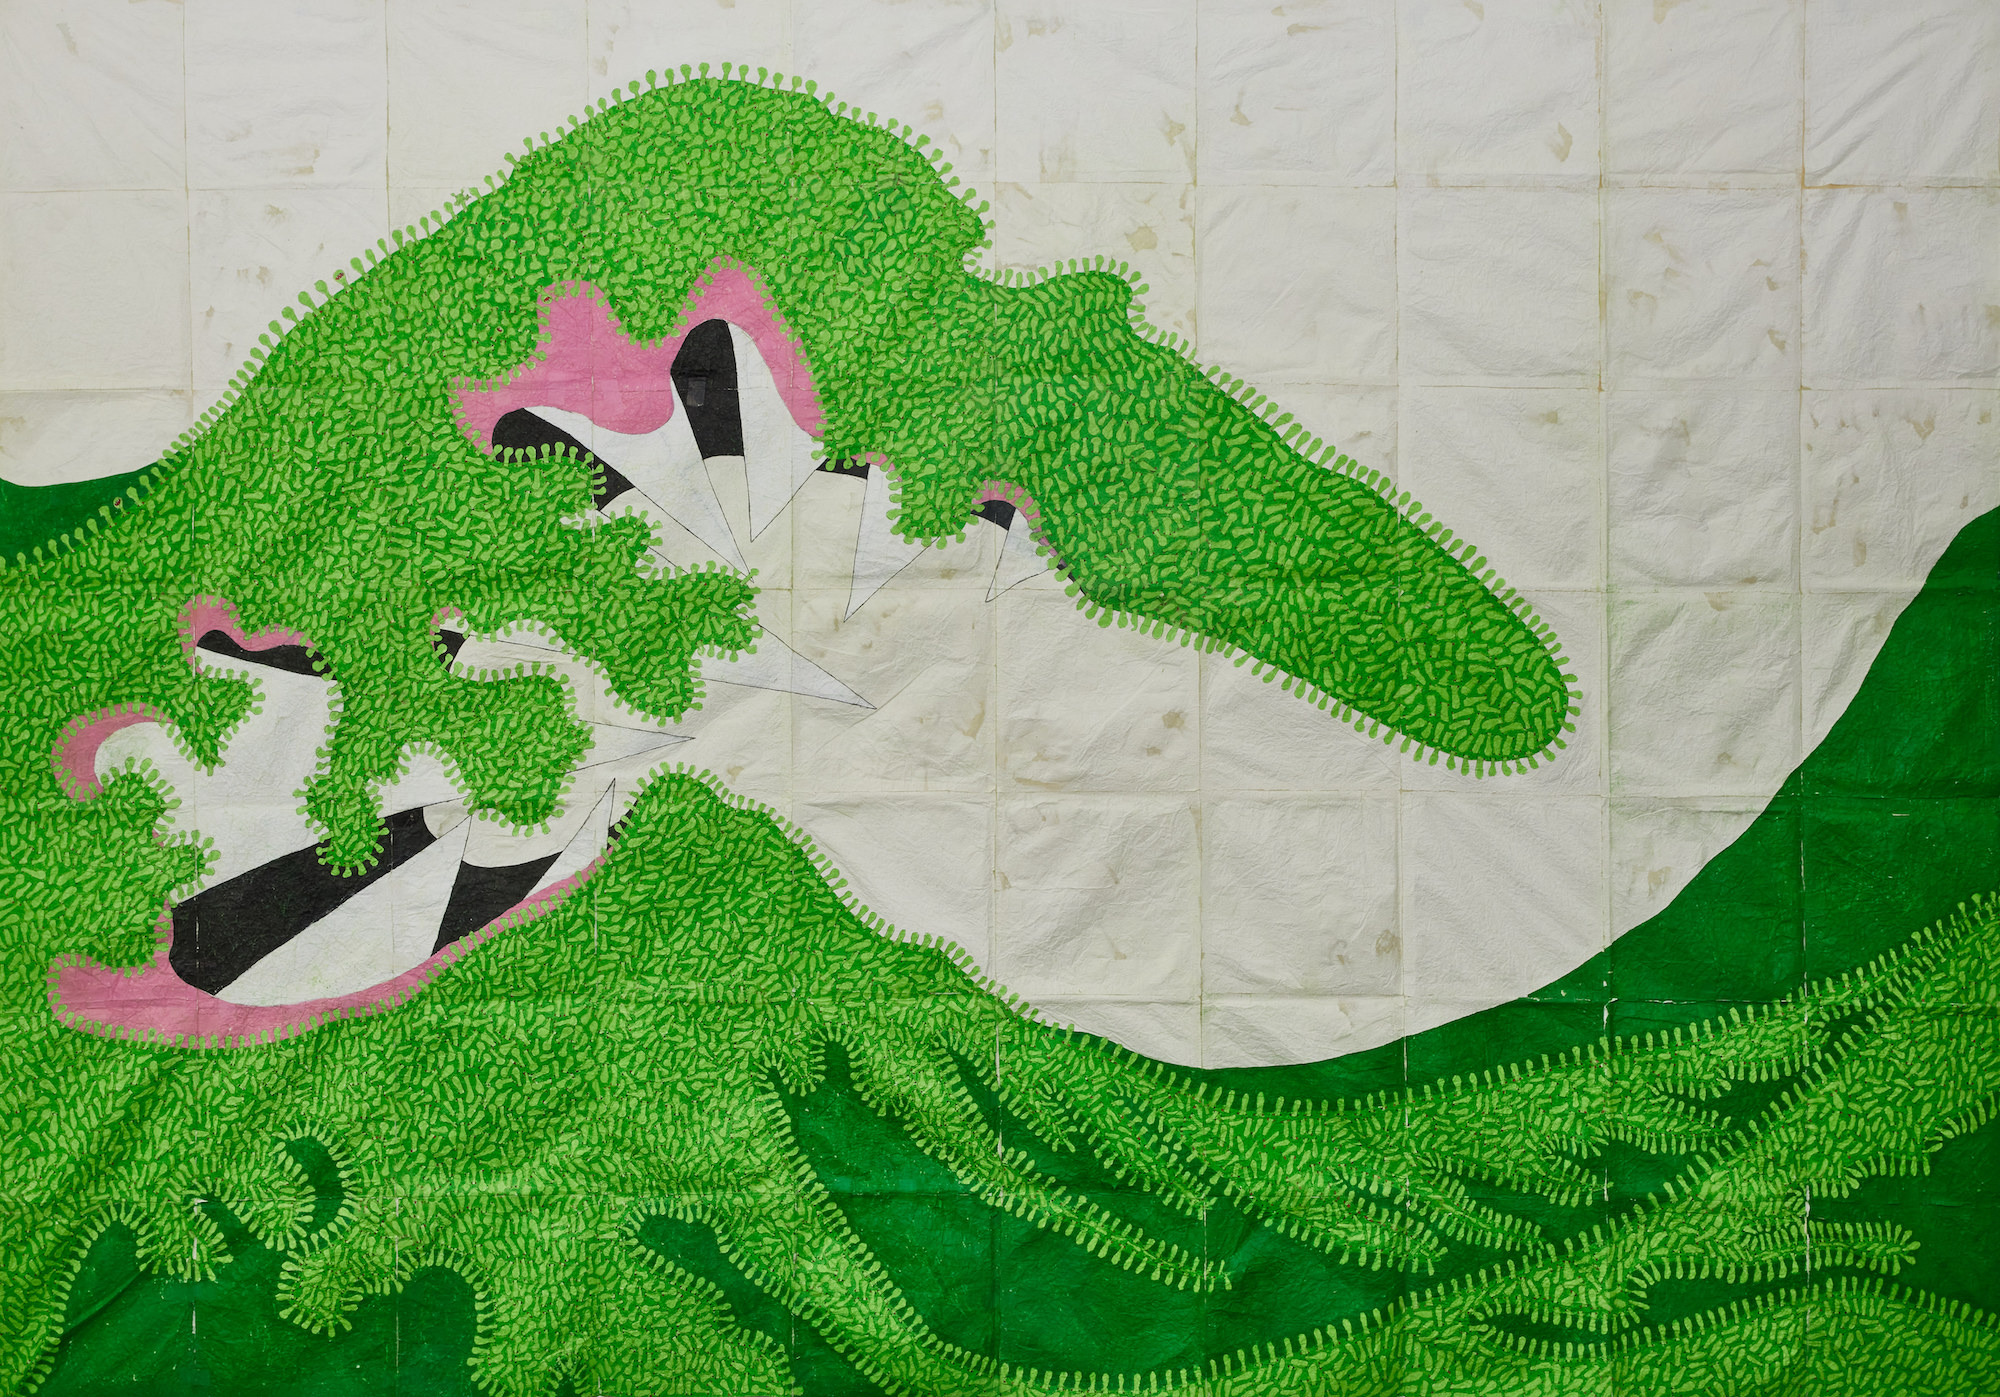 textile work of large green wave reflecting themes of pandemic